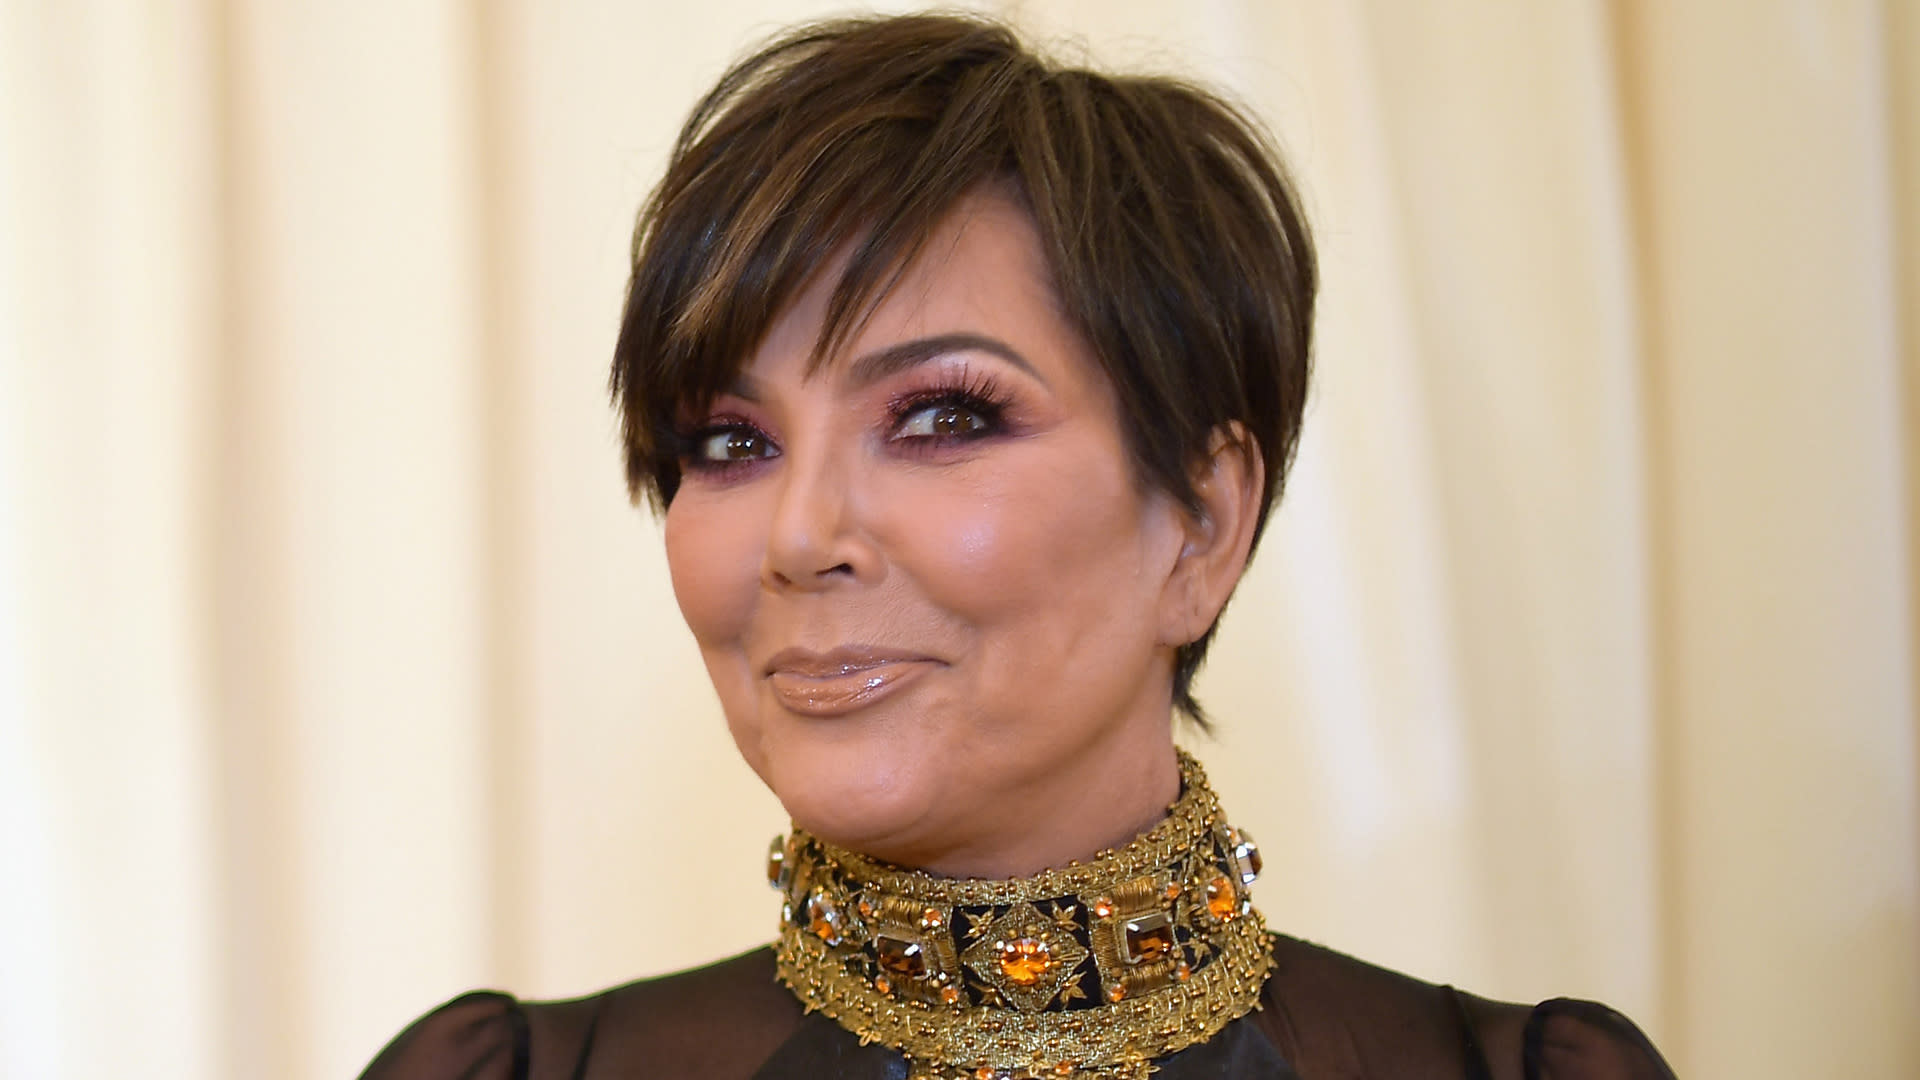 TMI AlertKris Jenner Cannot Stop Thinking About Sex Her Daughters